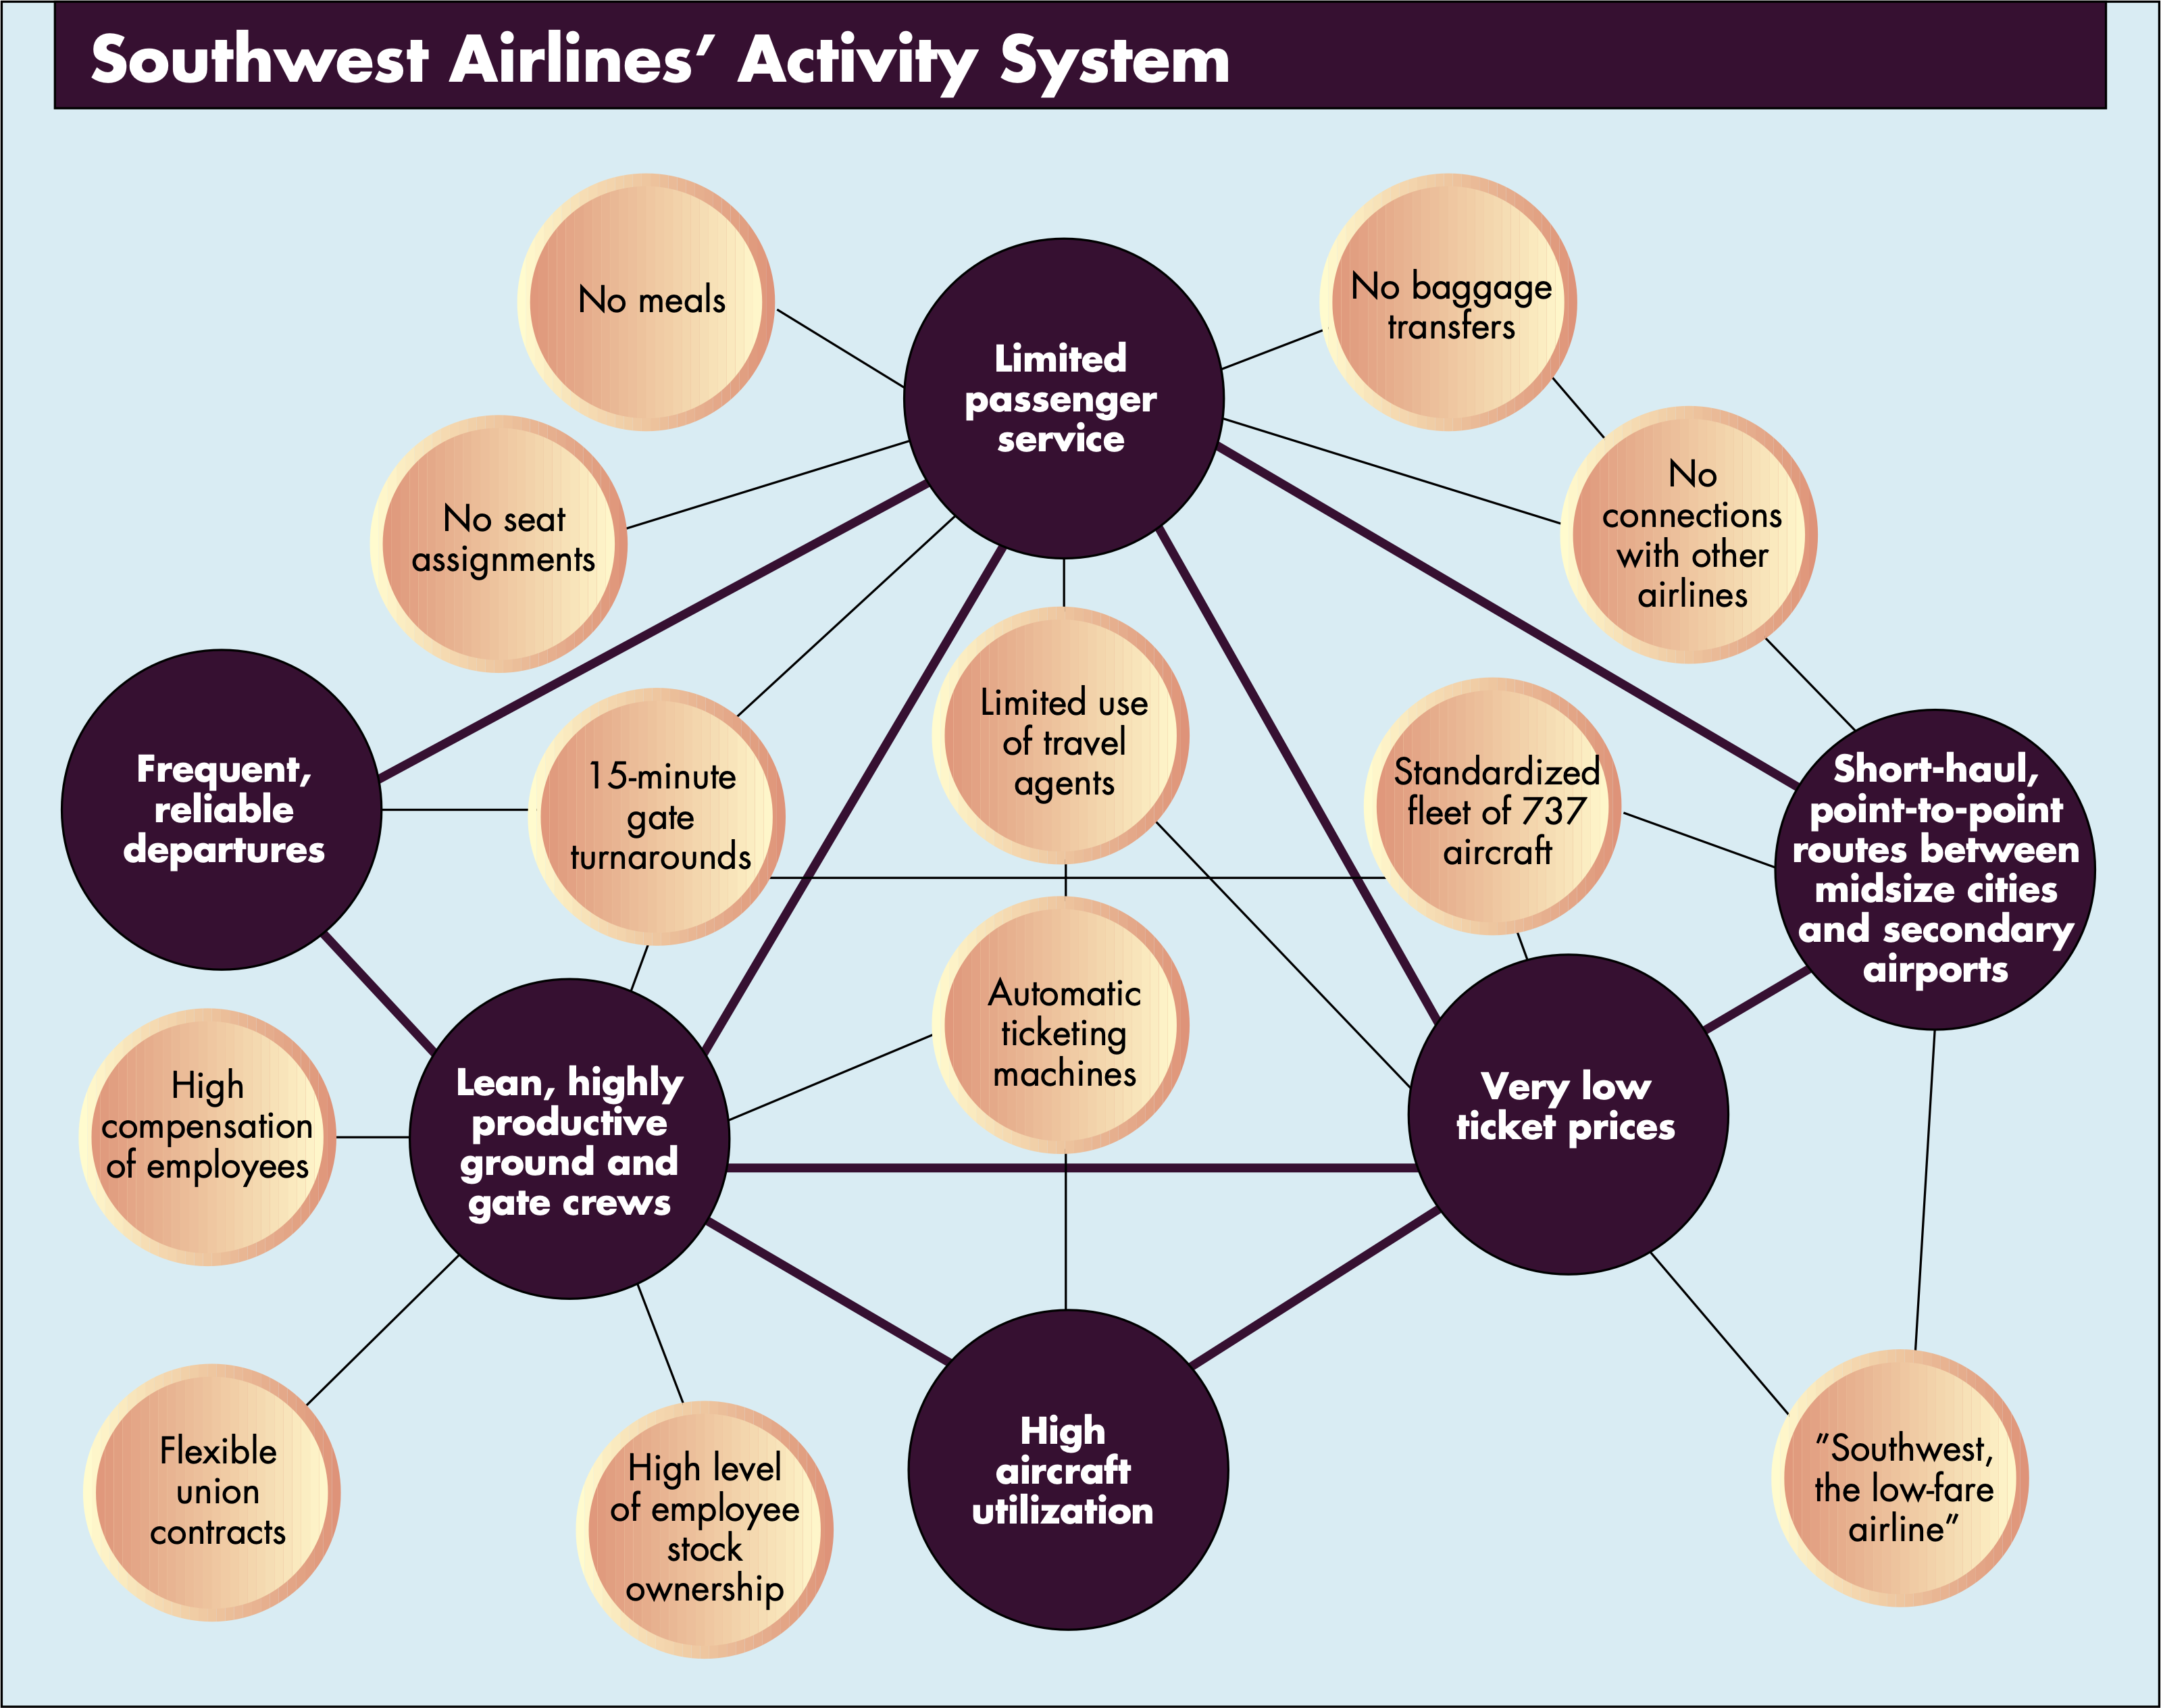 Michael Porter's "Activity Systems Map" for Southwest Airlines